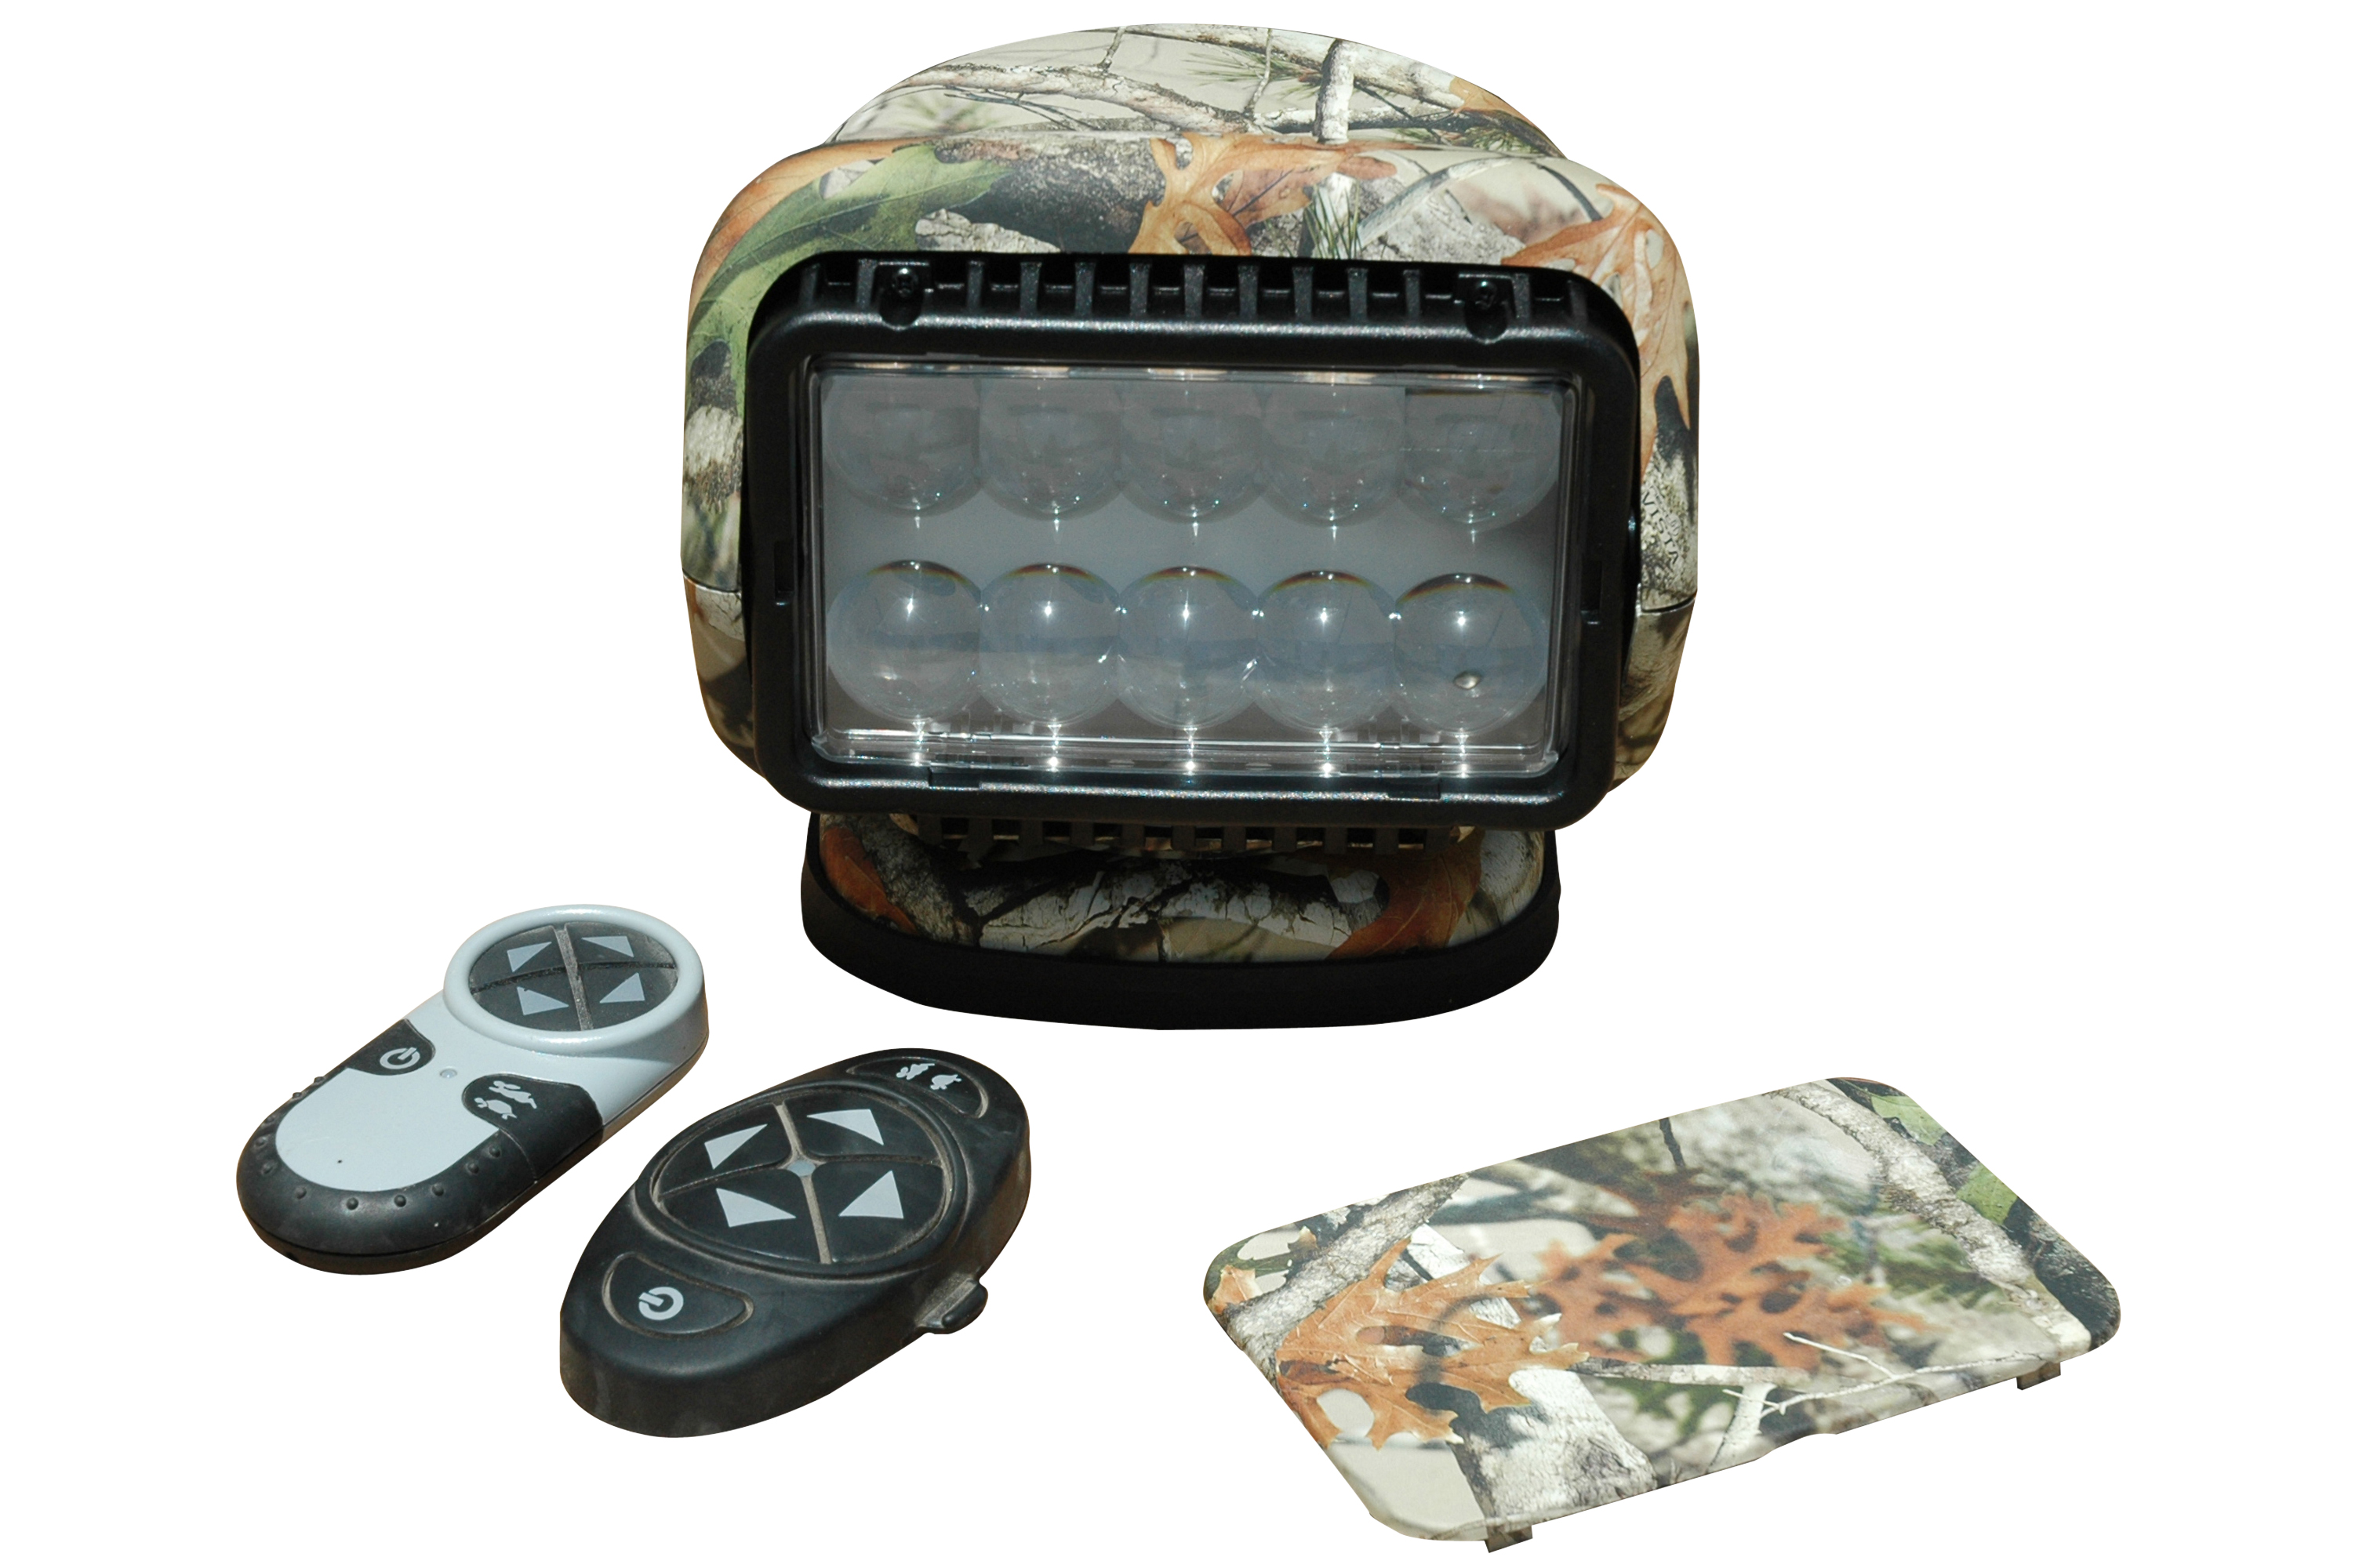 Larson Electronics Releases Dual Remote Control LED Hunting Spotlight